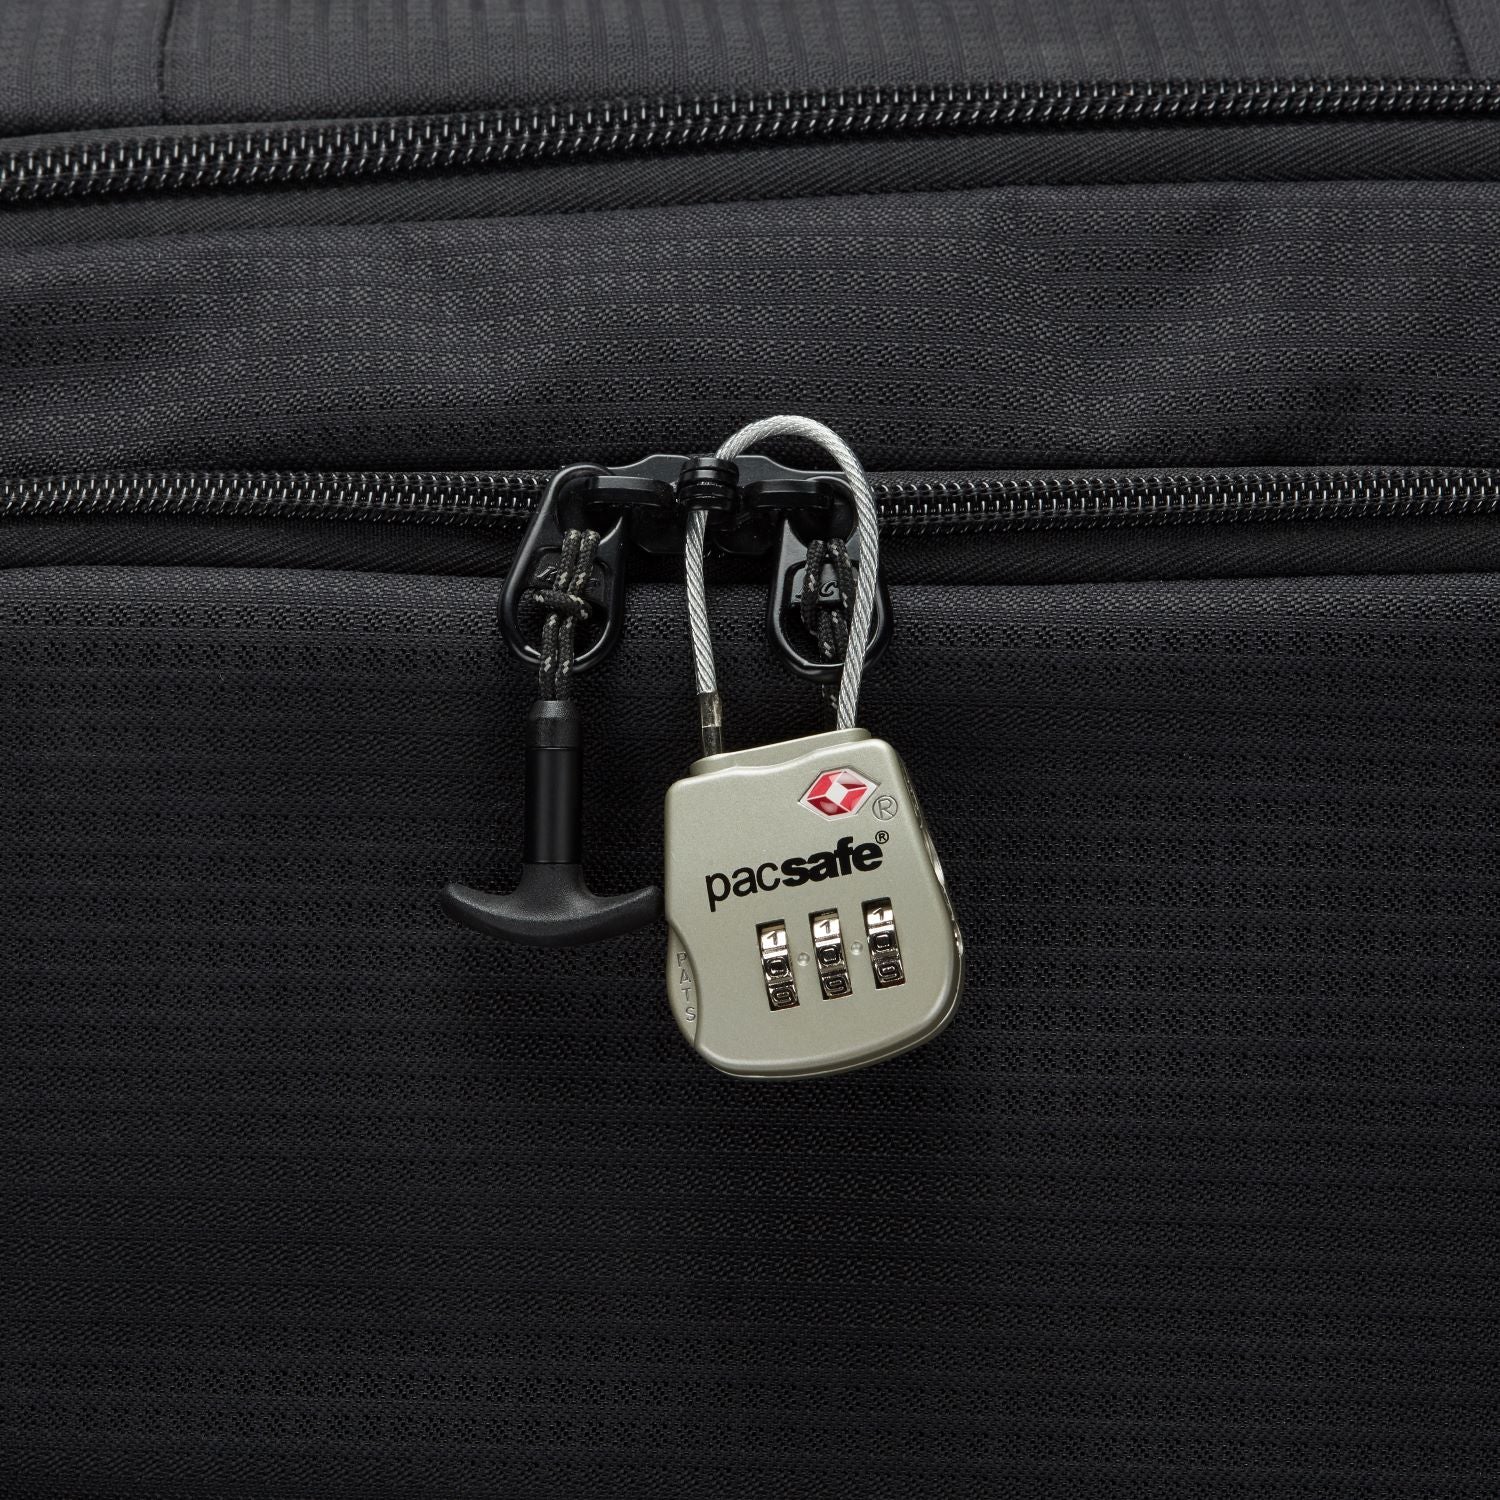 Pacsafe ProSafe 800 TSA Accepted 3-Dial Cable Lock Silver